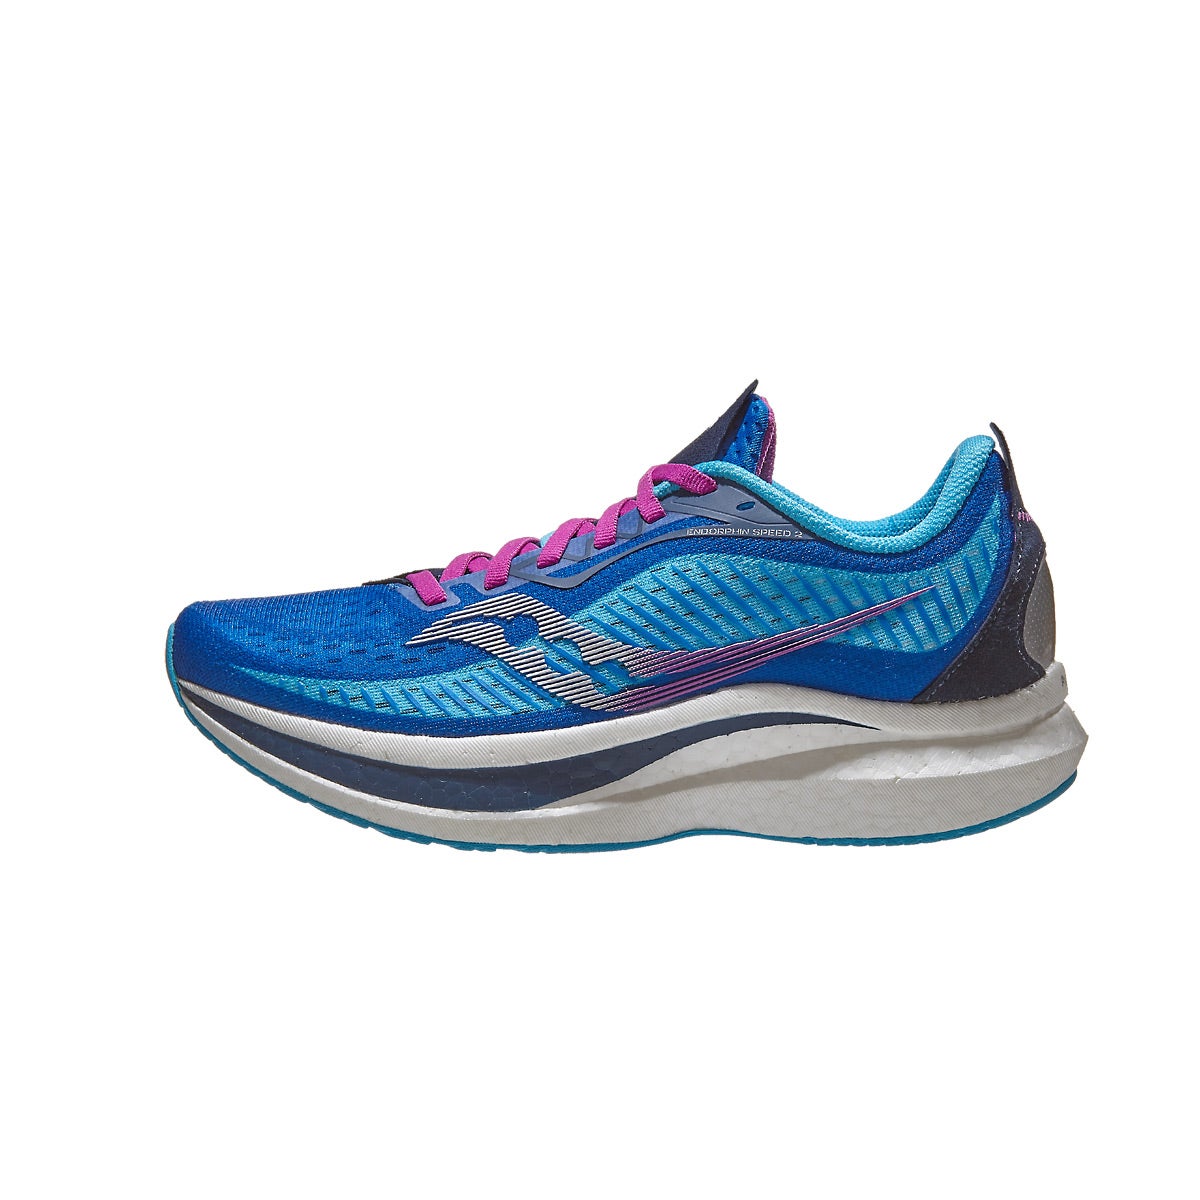 Saucony Endorphin Speed 2 Women's Shoes Royal/Blaze 360° View | Running ...